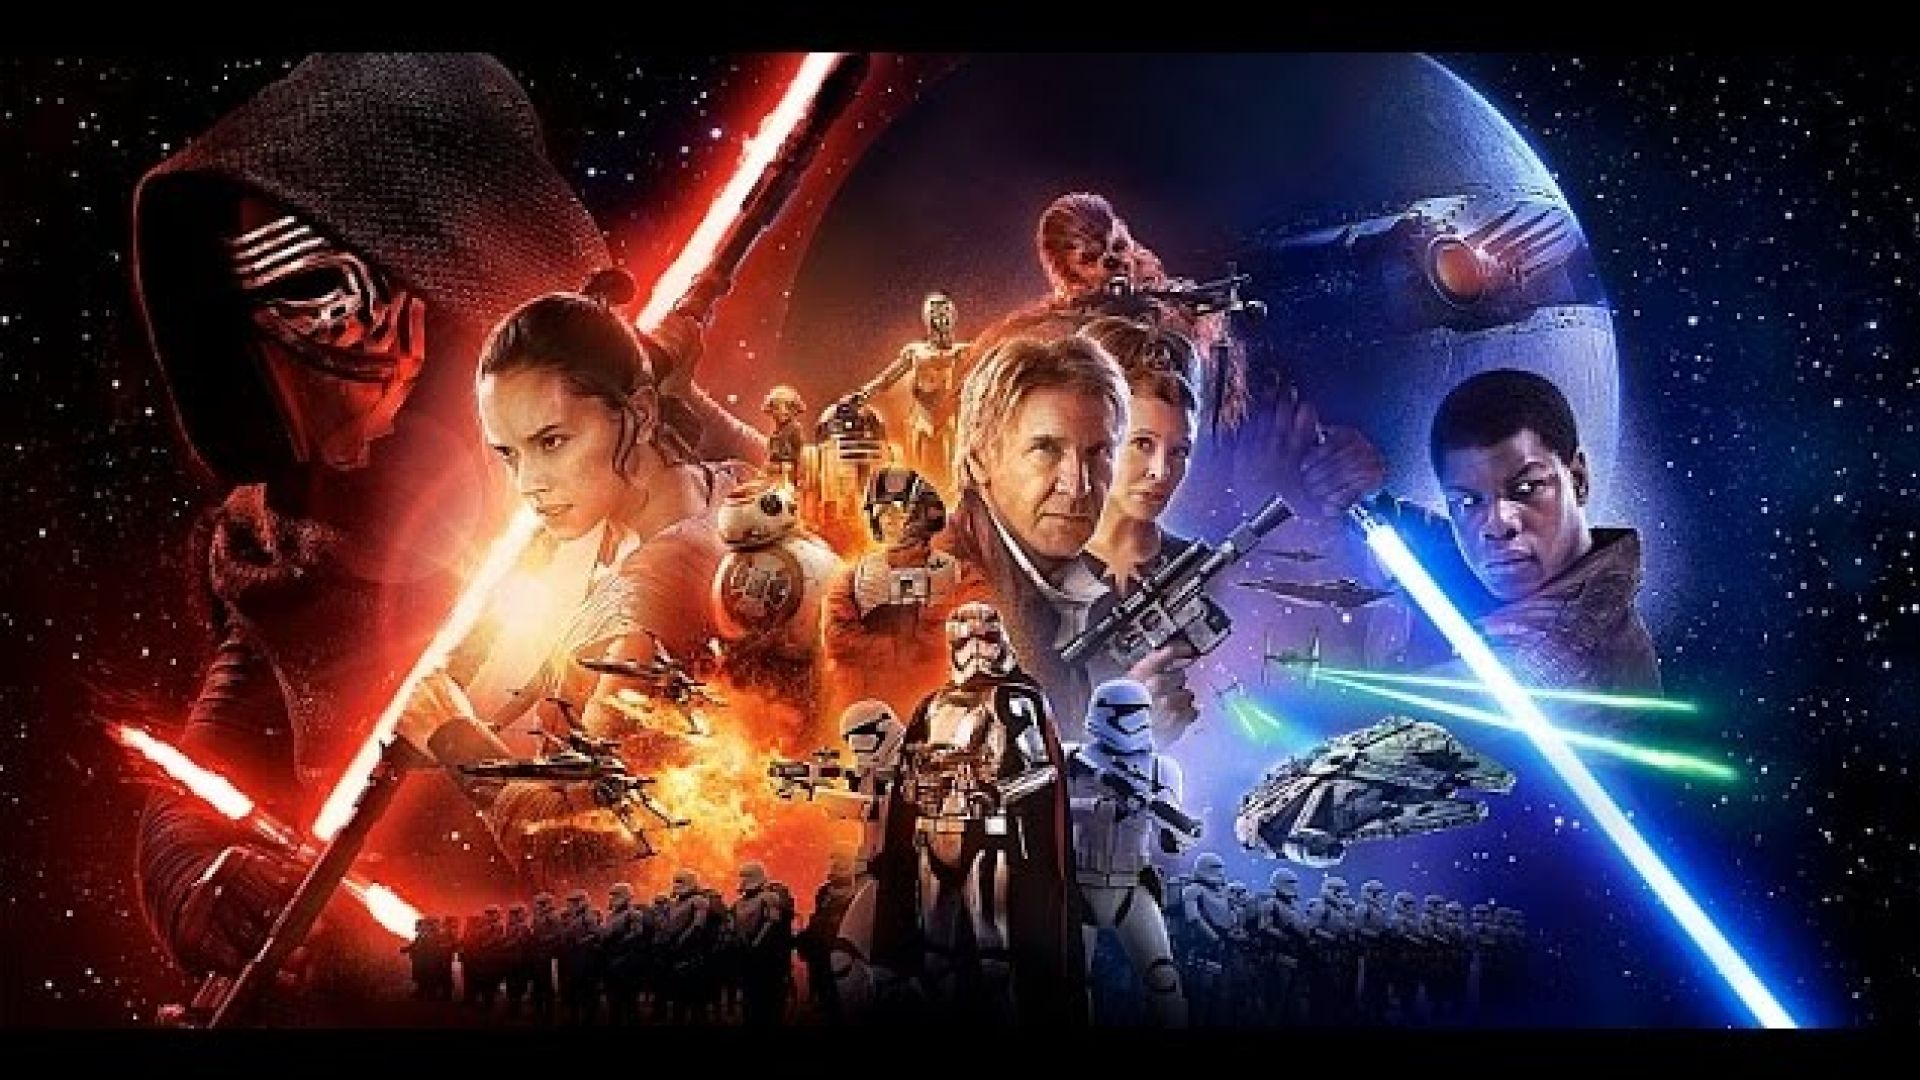 Non Spoiler Review: Star Wars The Force Awakens